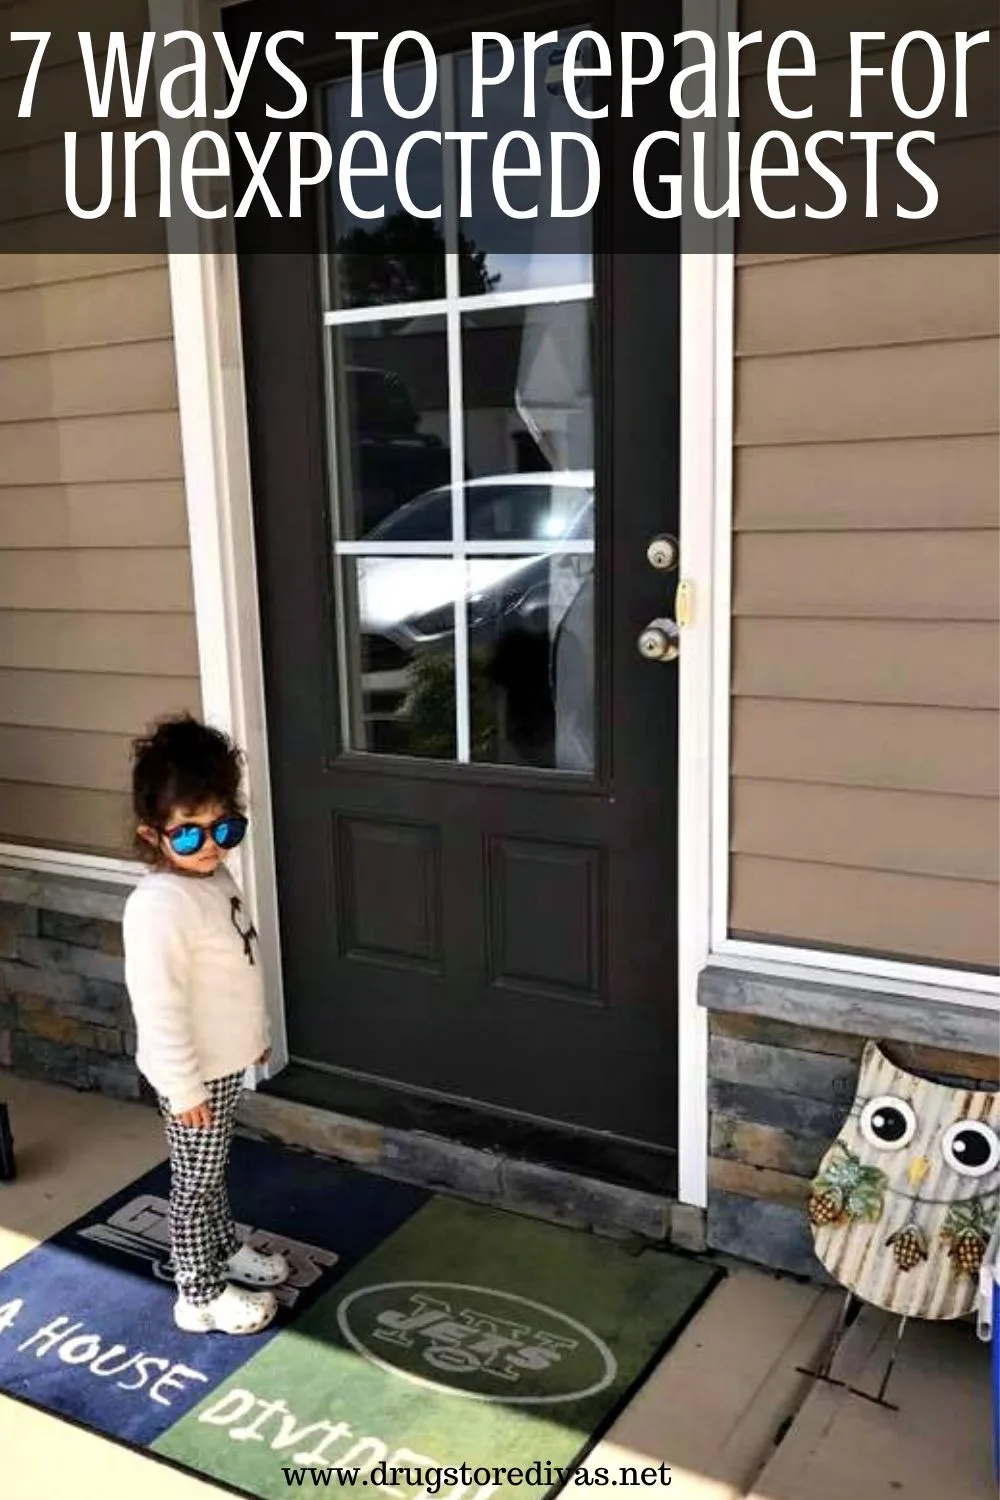 A young girl waiting on a doorstep with the words "7 Ways To Prepare For Unexpected Guests" digitally written above her.